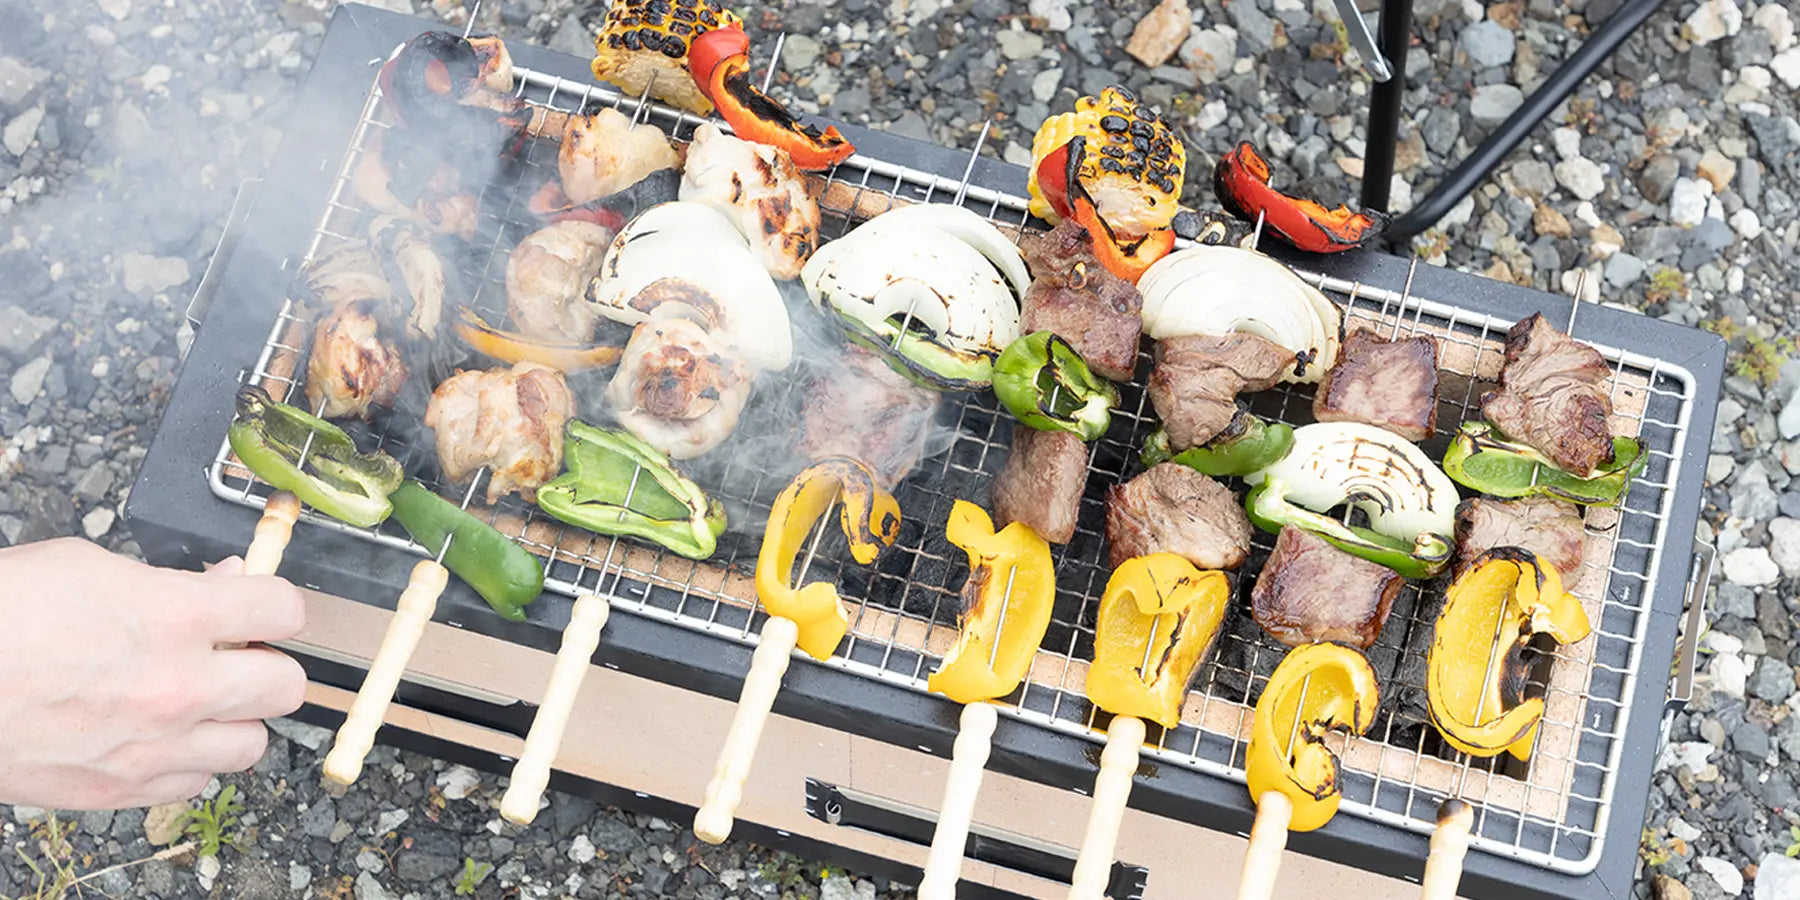 Discover our great selection of Outdoor Grills at Globalkitchen Japan.